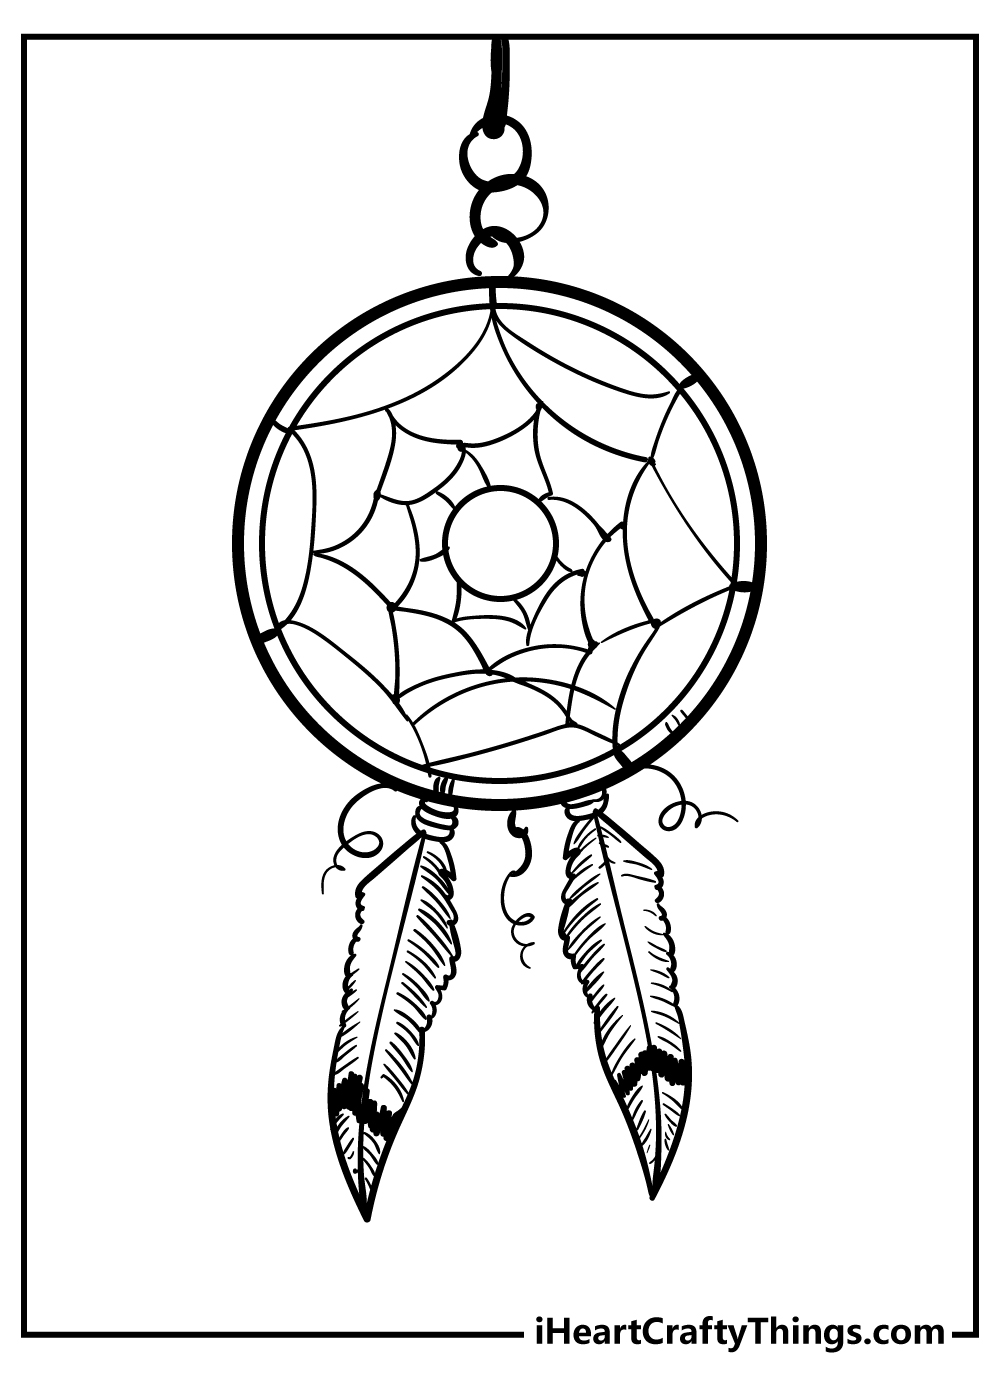 Dream Catcher Coloring Pages for adults free printable